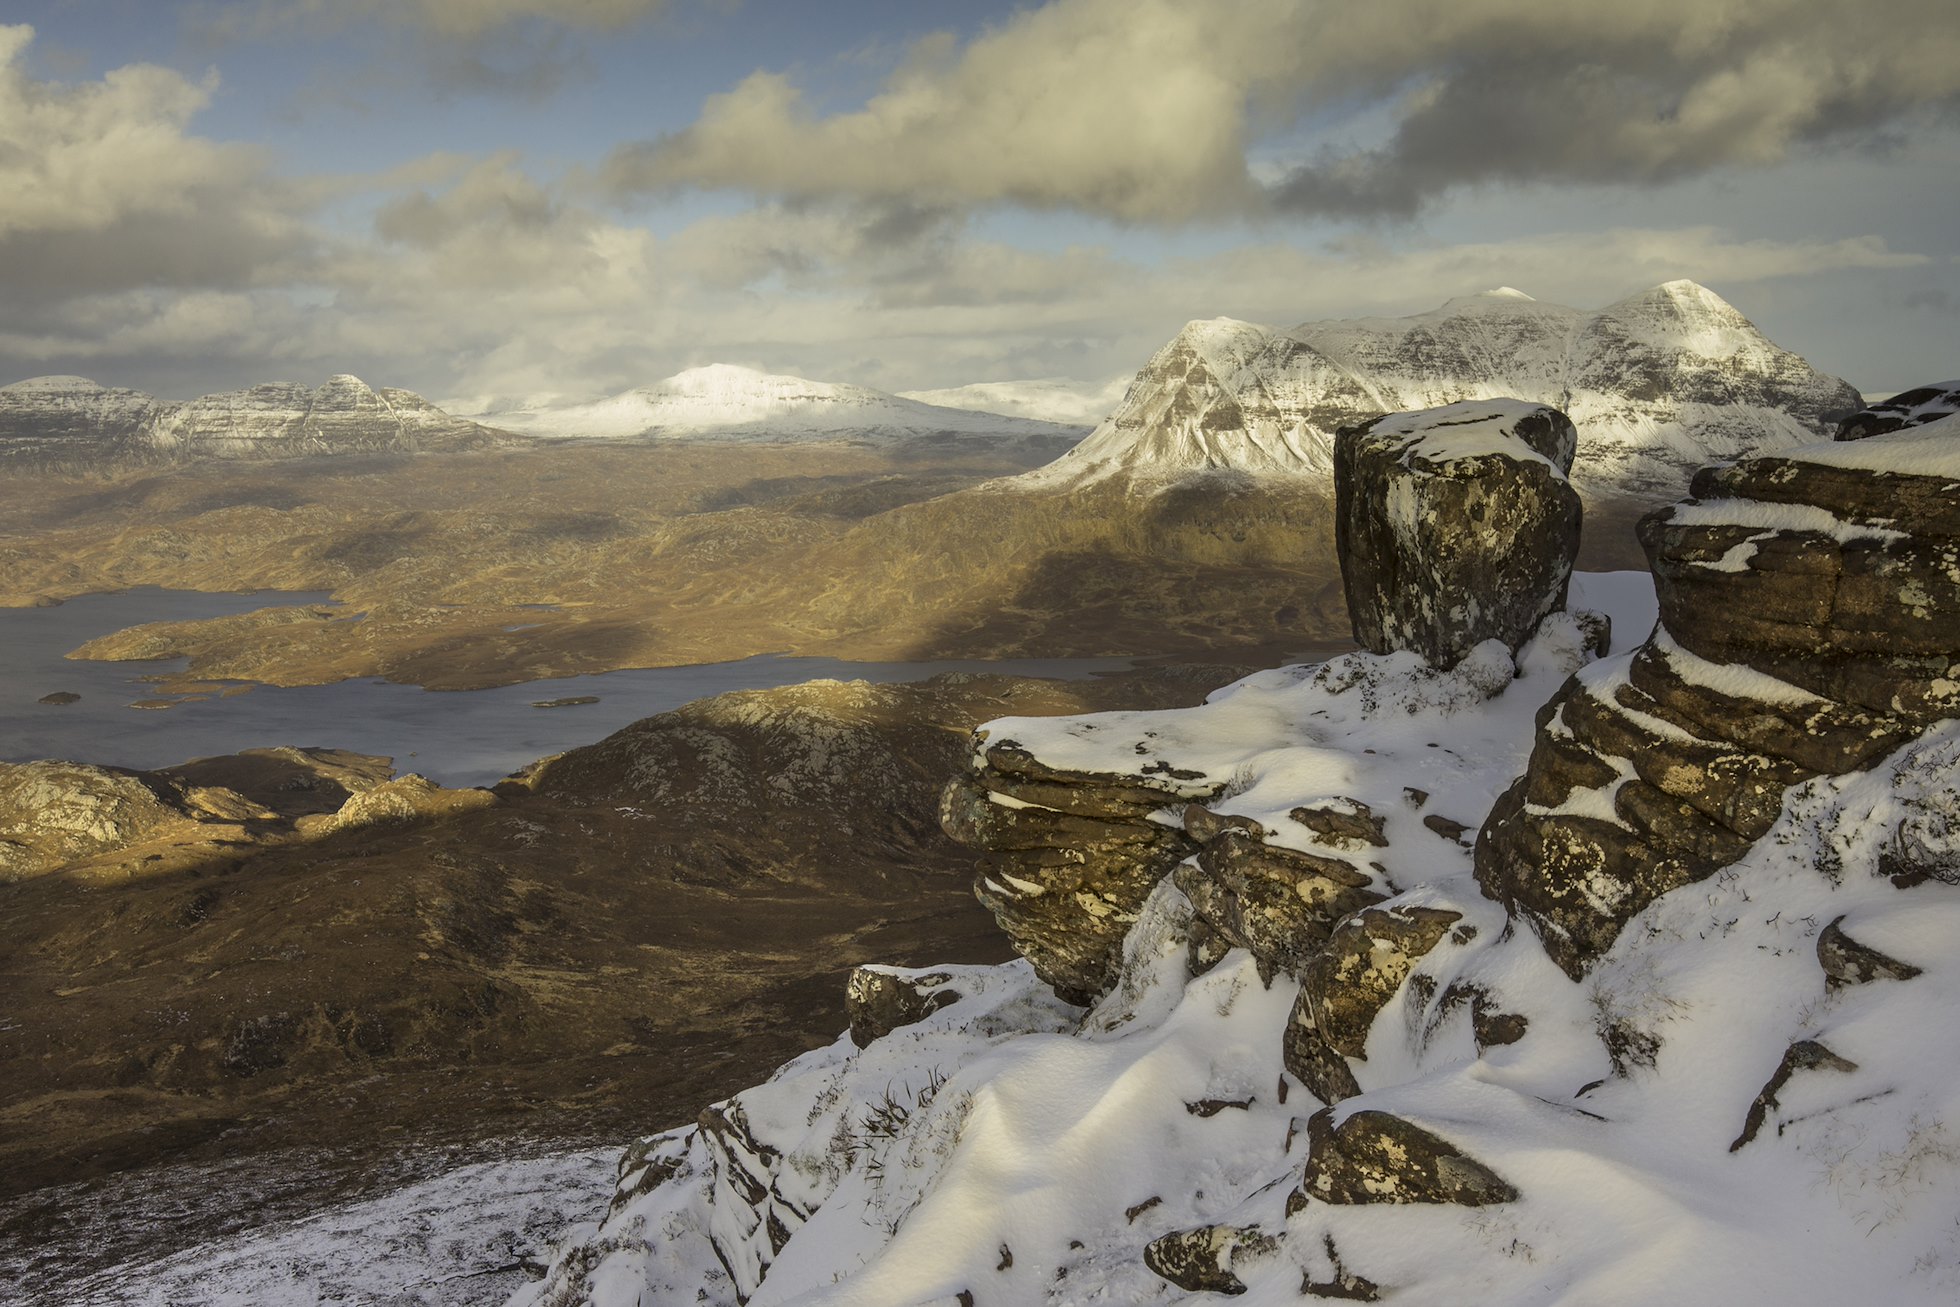 View across Inverpolly Forest from top of Stac Pollaidh, Coigach, Scotland.